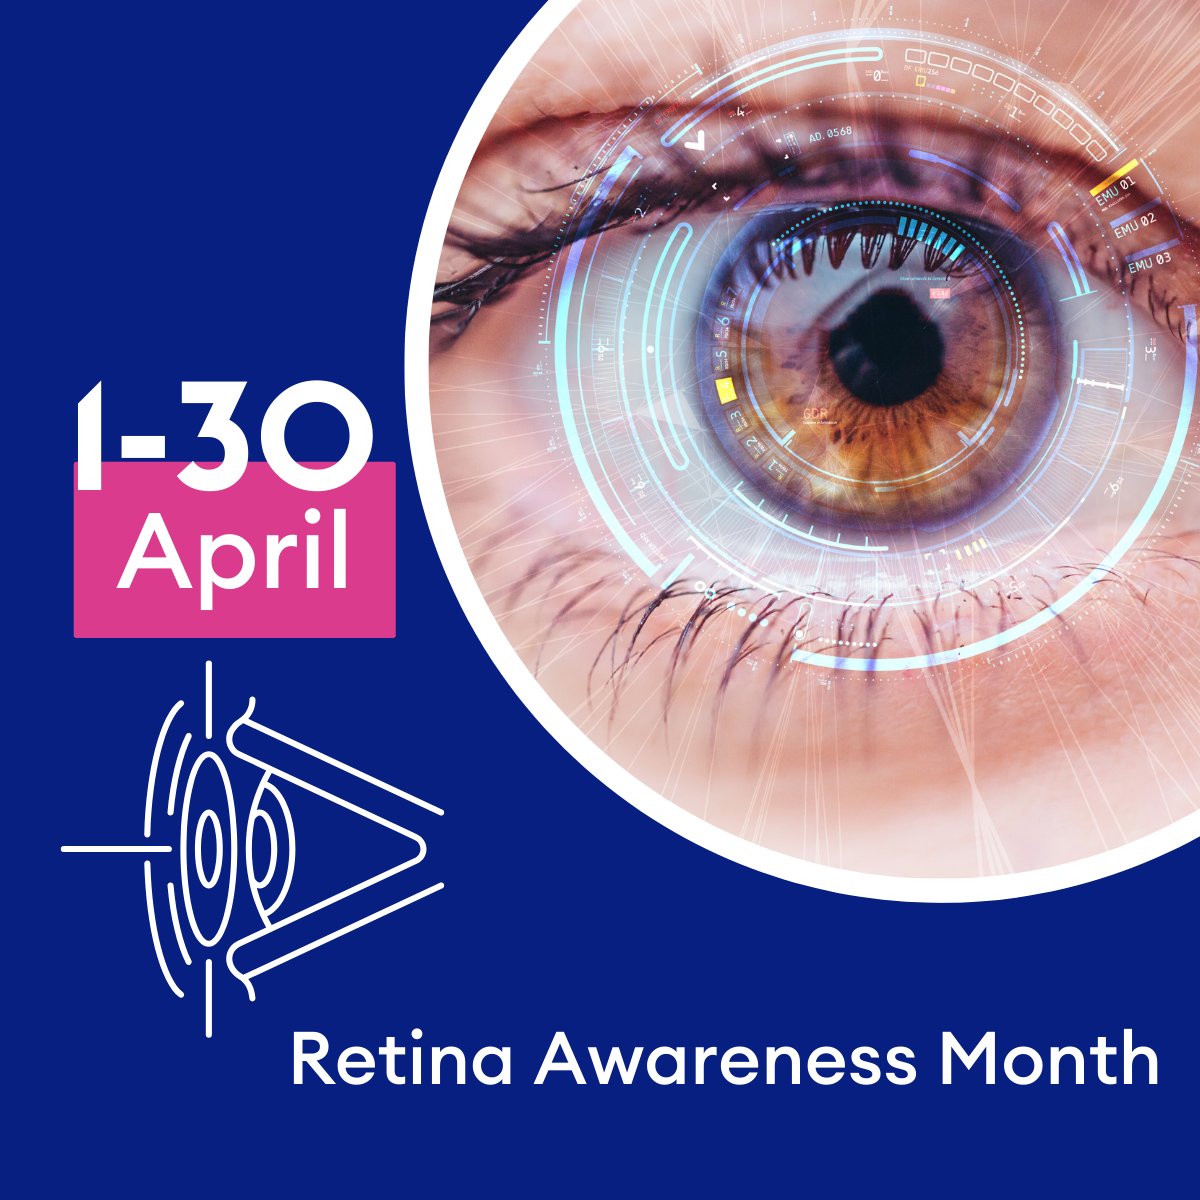 April is retina awareness month! Keep an eye on our socials this month to read about Dr Katerina Kapetnovic's research and how it could help treat inherited retinal eye diseases in the next few years! #RetinaAwarenessMonth #EyeConditions